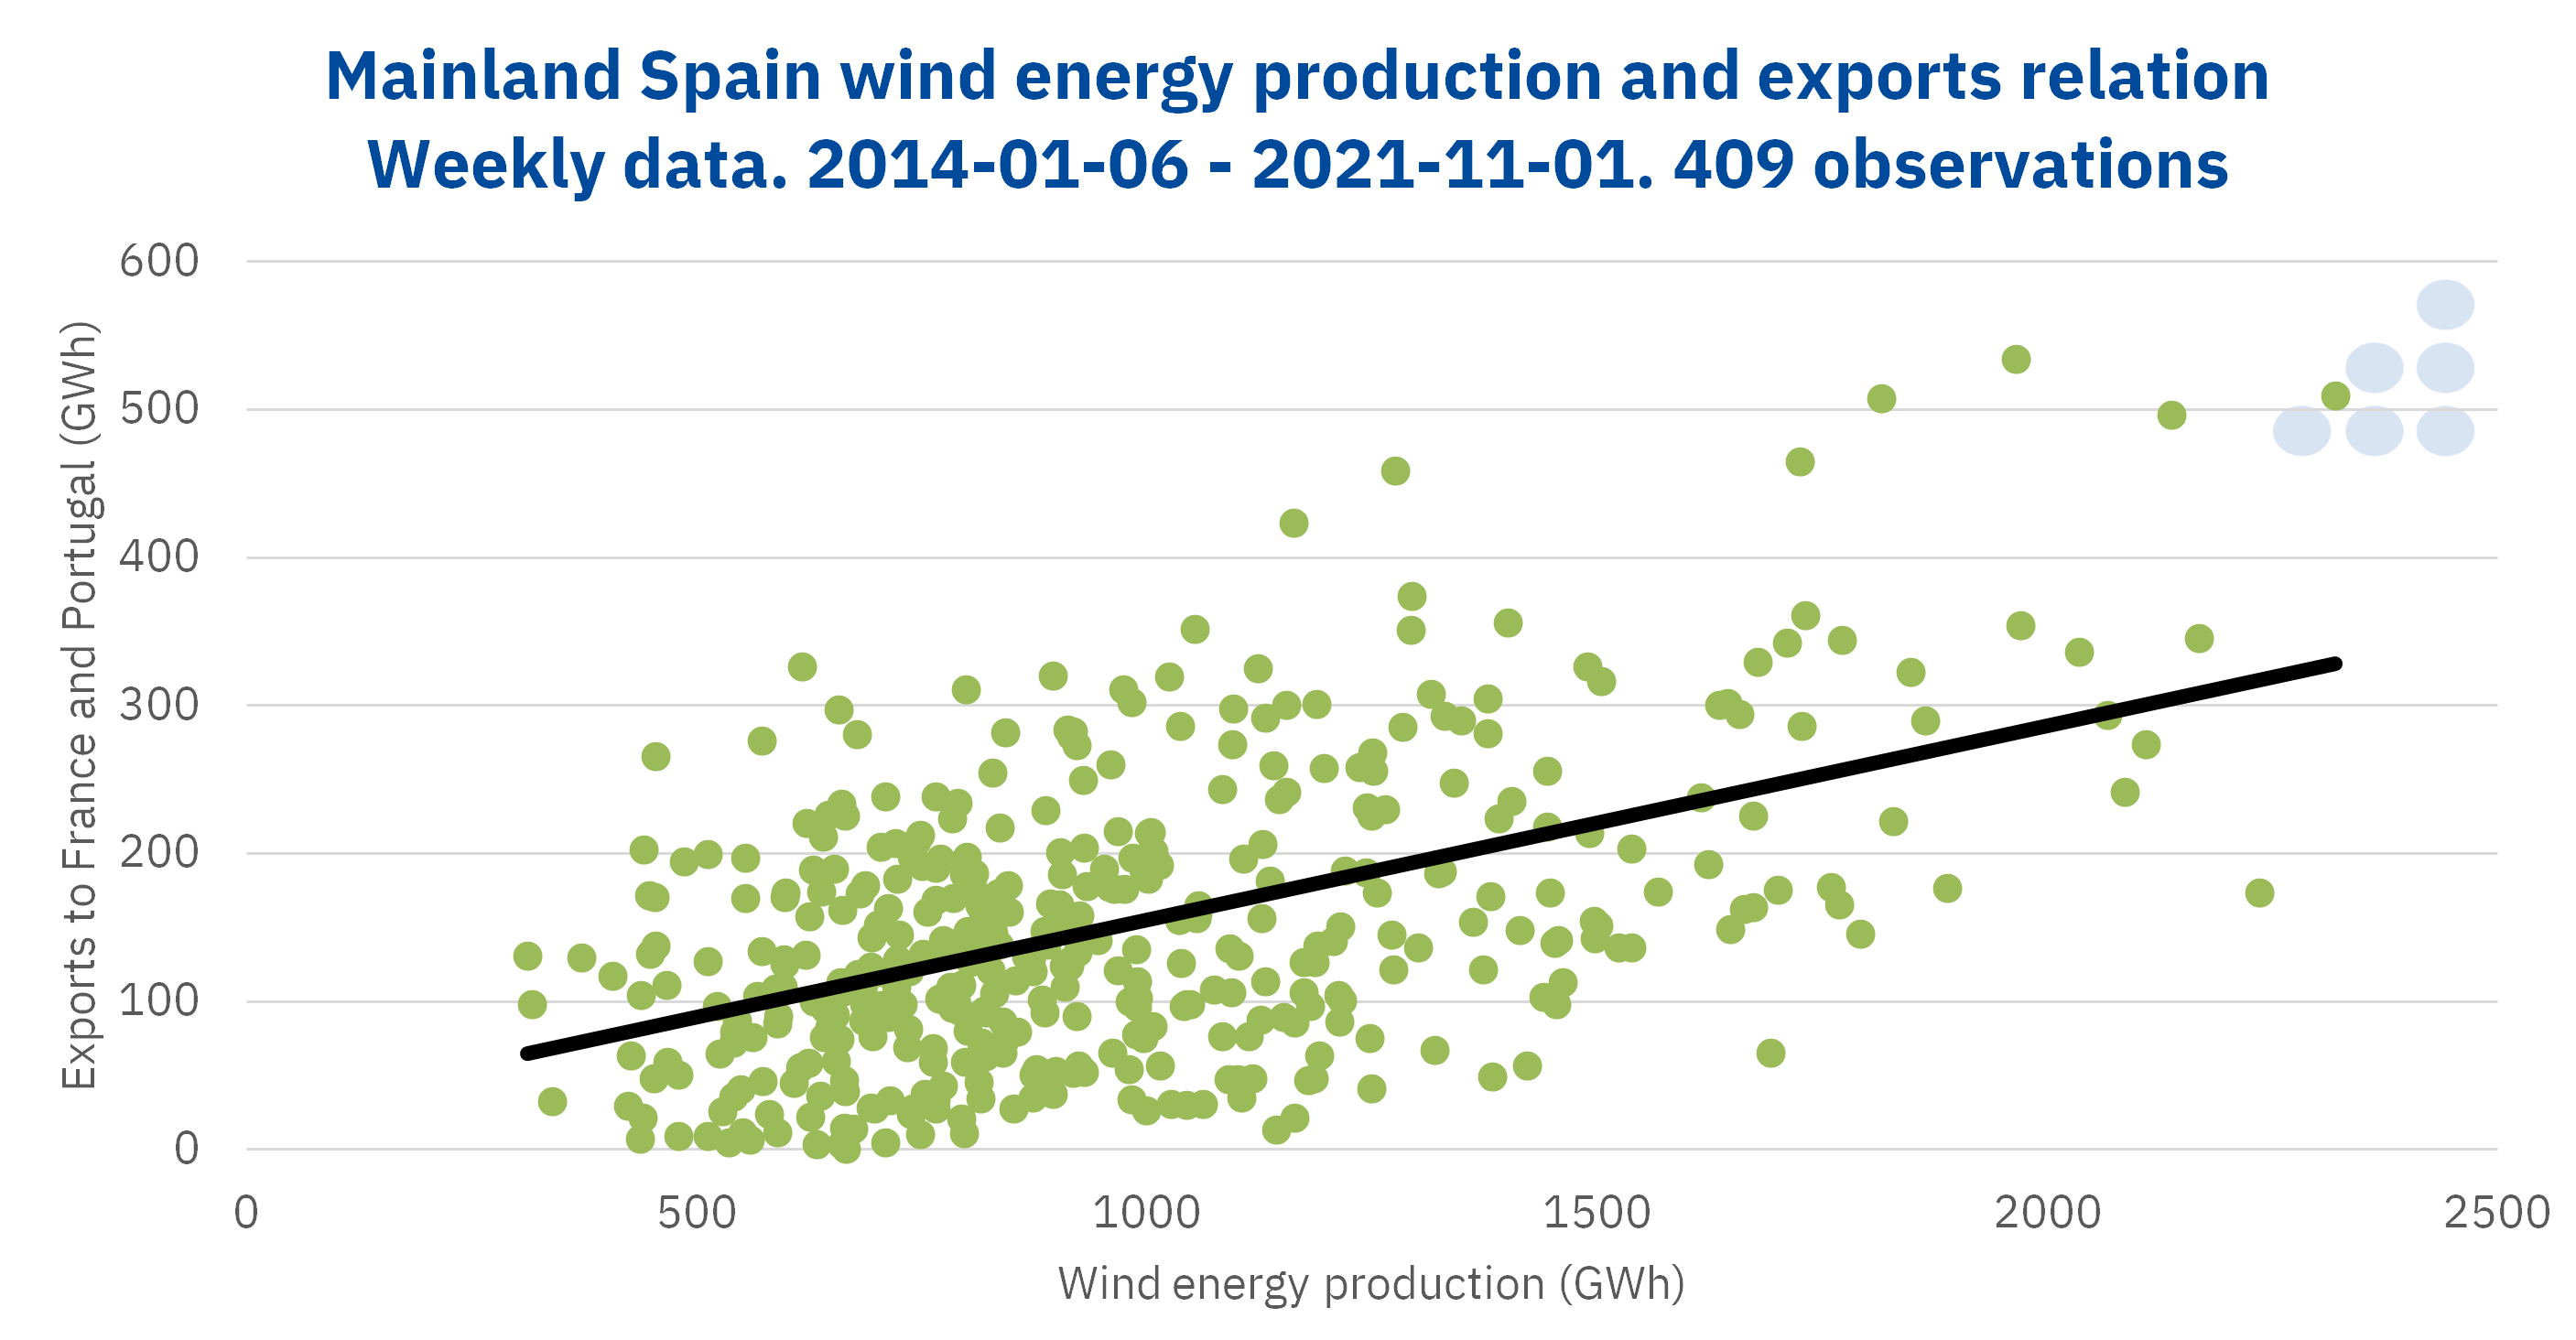 AleaSoft - Mainland spain wind energy production exports relation weekly